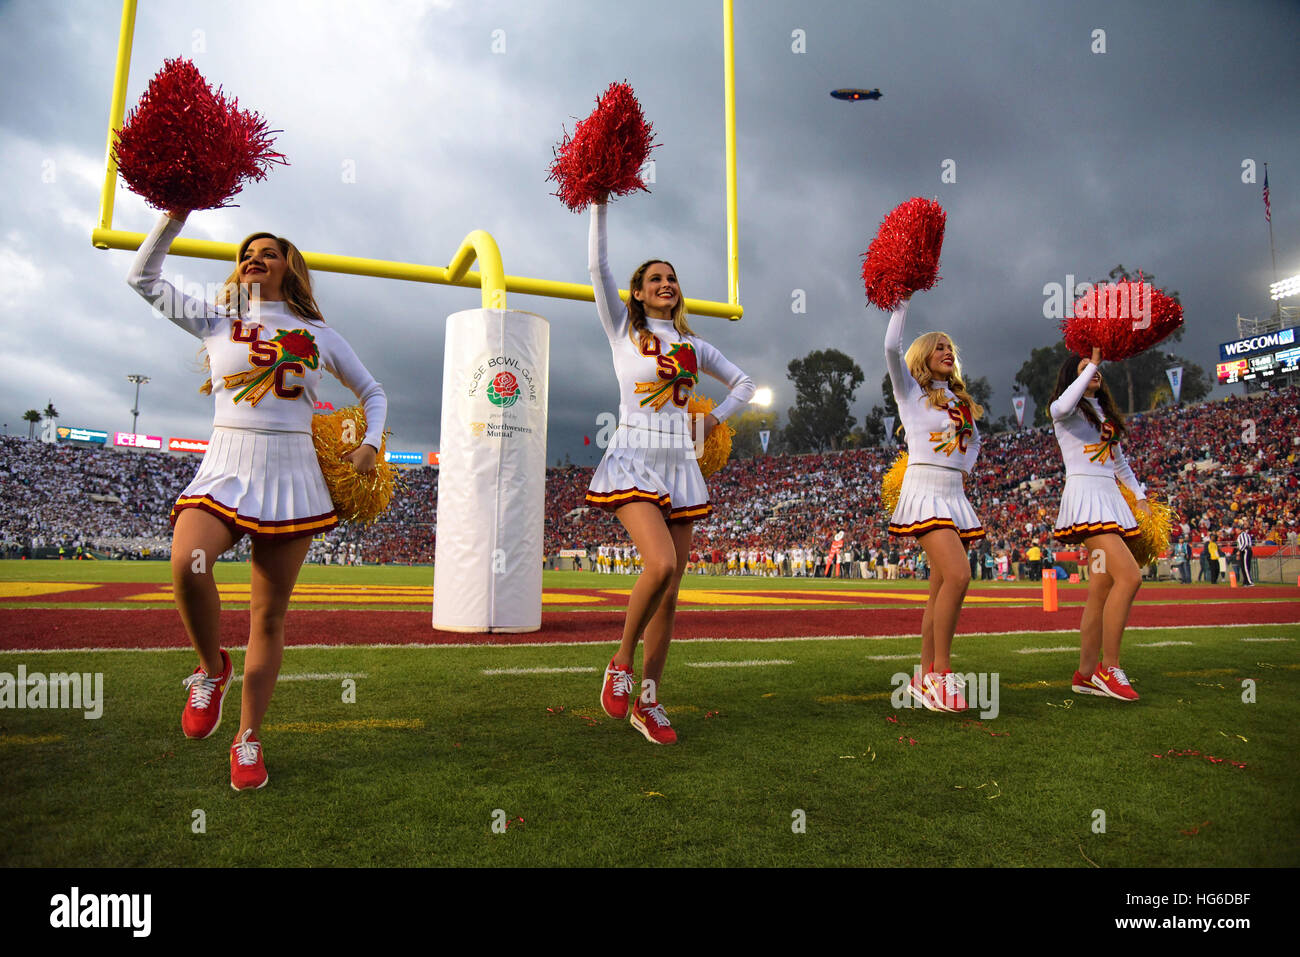 Pasadena, California, USA. 2nd Jan, 2017. Cheerleaders of the USC Trojans in action during a thrilling 52-49 victory over the Penn State Nittany Lions in the 103rd Rose Bowl game in Pasadena, Ca. © John Pyle/ZUMA Wire/Alamy Live News Stock Photo